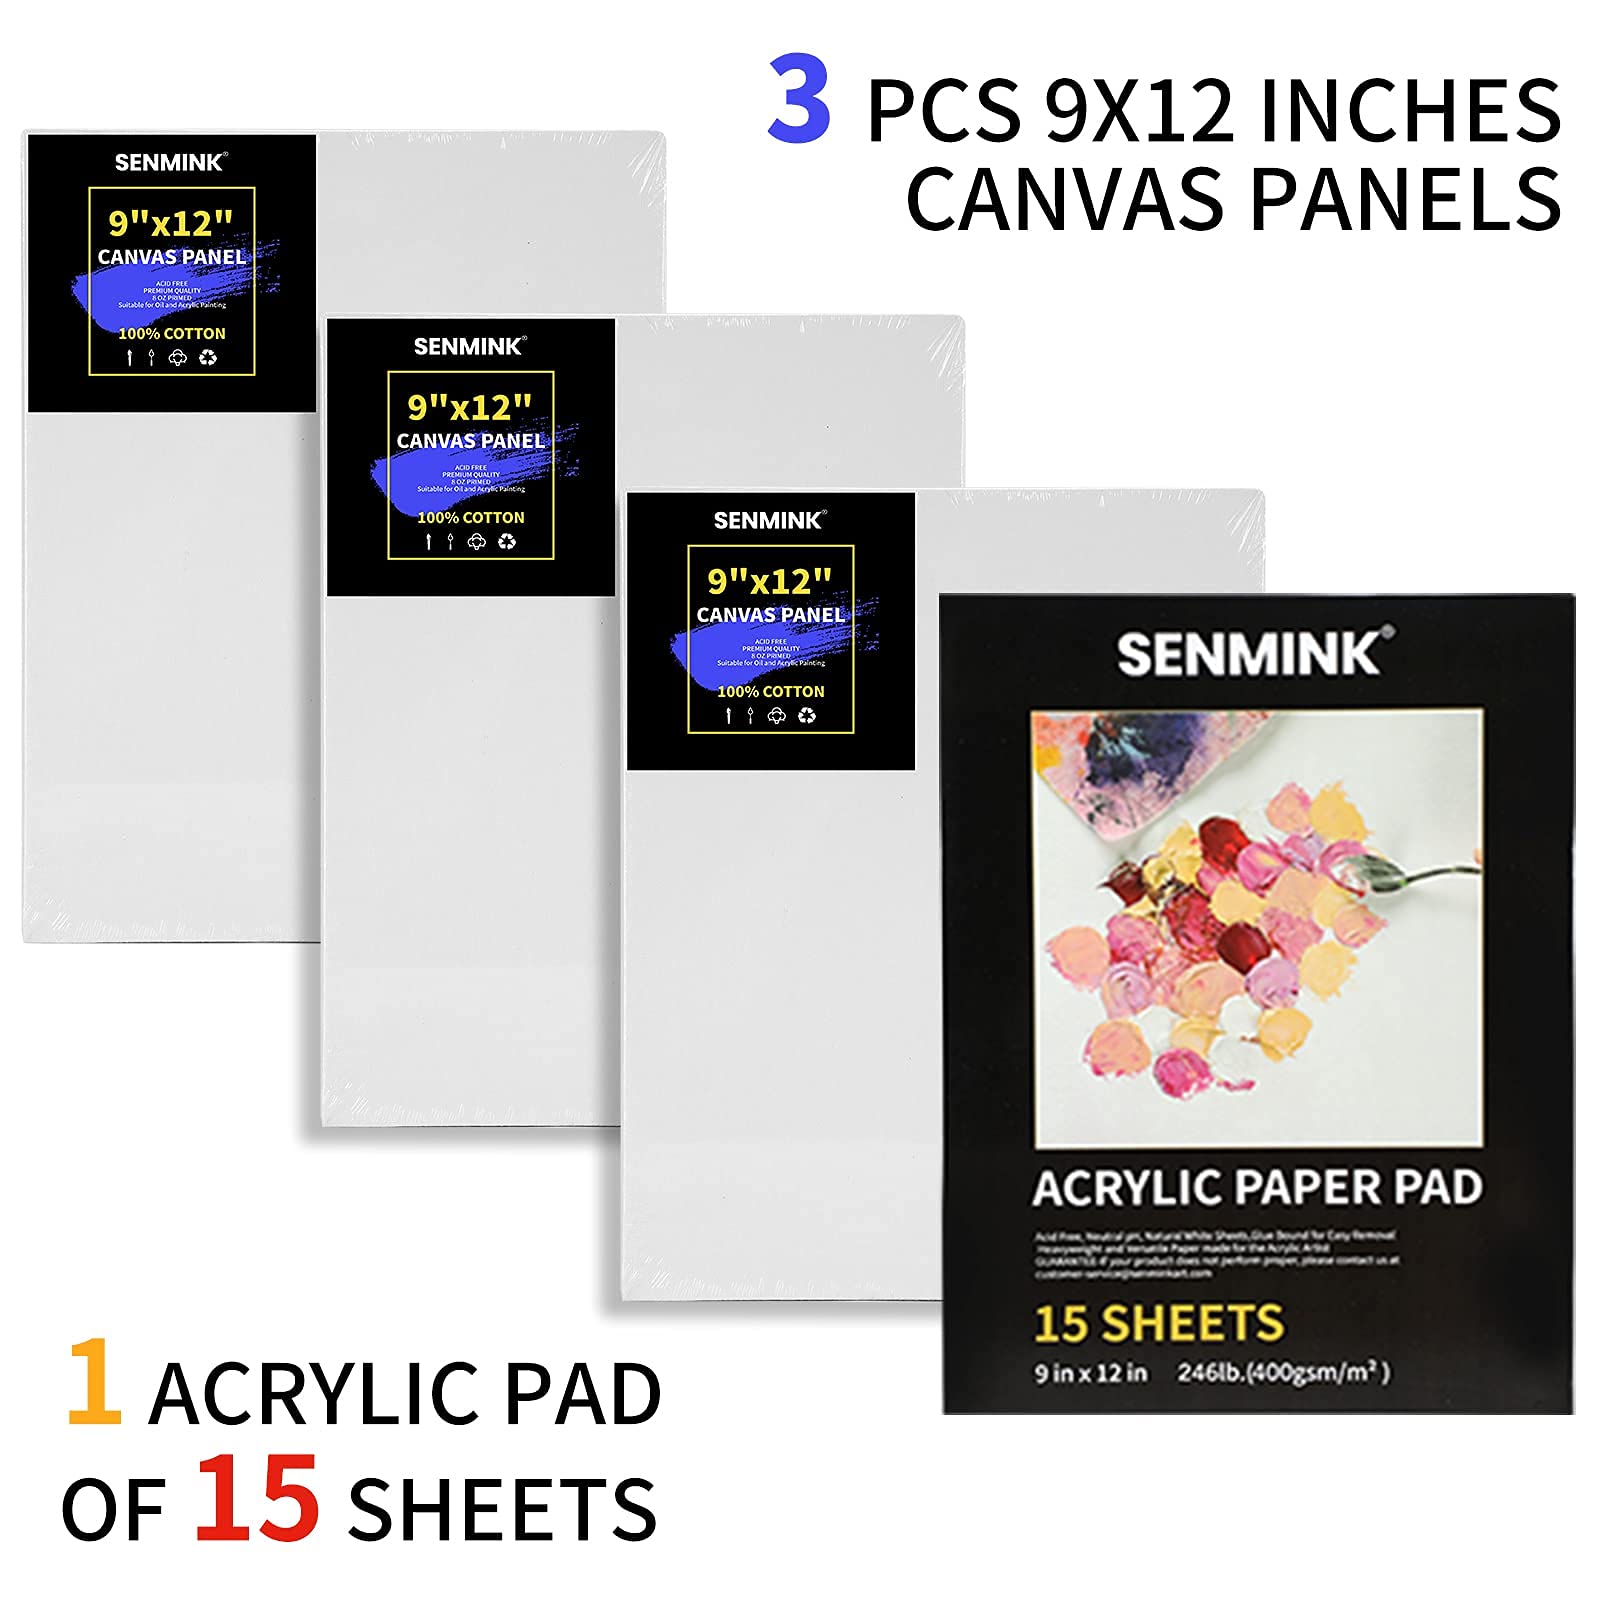 69 Pcs Artists Painting Set with Wood Box Easel，48×12ML Acrylic Painting Set, Canvas 9x12 inches, Wood Palette, Palette Knife Art Supplies, Paint Set for Adults Beginners